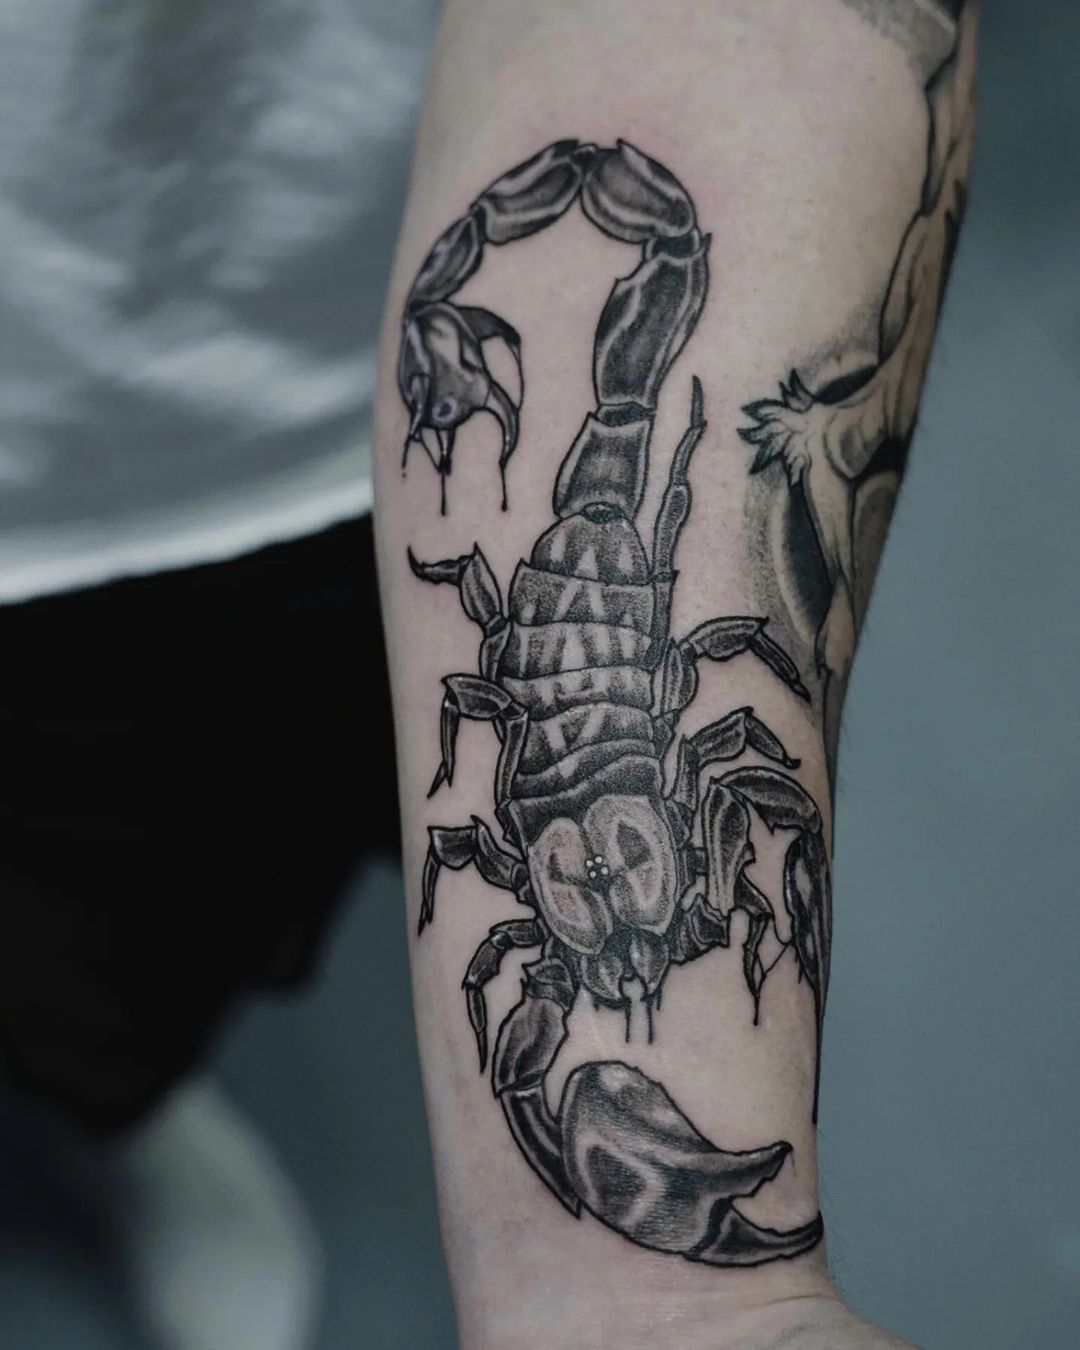 What Does a Scorpion Tattoo Mean? | Auntyflo.com